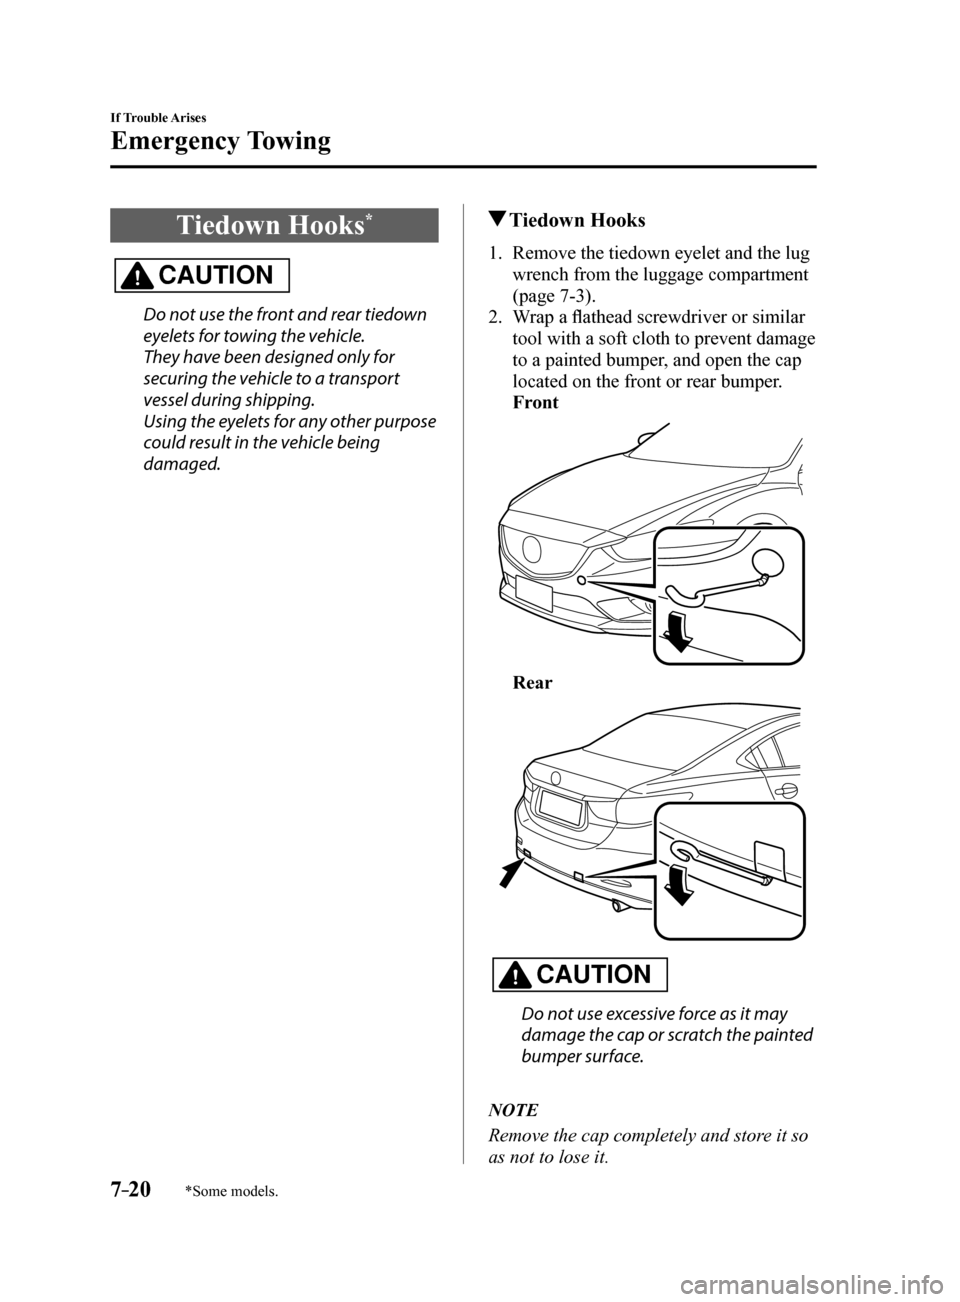 MAZDA MODEL 6 2017  Owners Manual (in English) 7–20
If Trouble Arises
Emergency Towing
*Some models.
Tiedown Hooks*
CAUTION
Do not use the front and rear tiedown 
eyelets for towing the vehicle.
They have been designed only for 
securing the veh